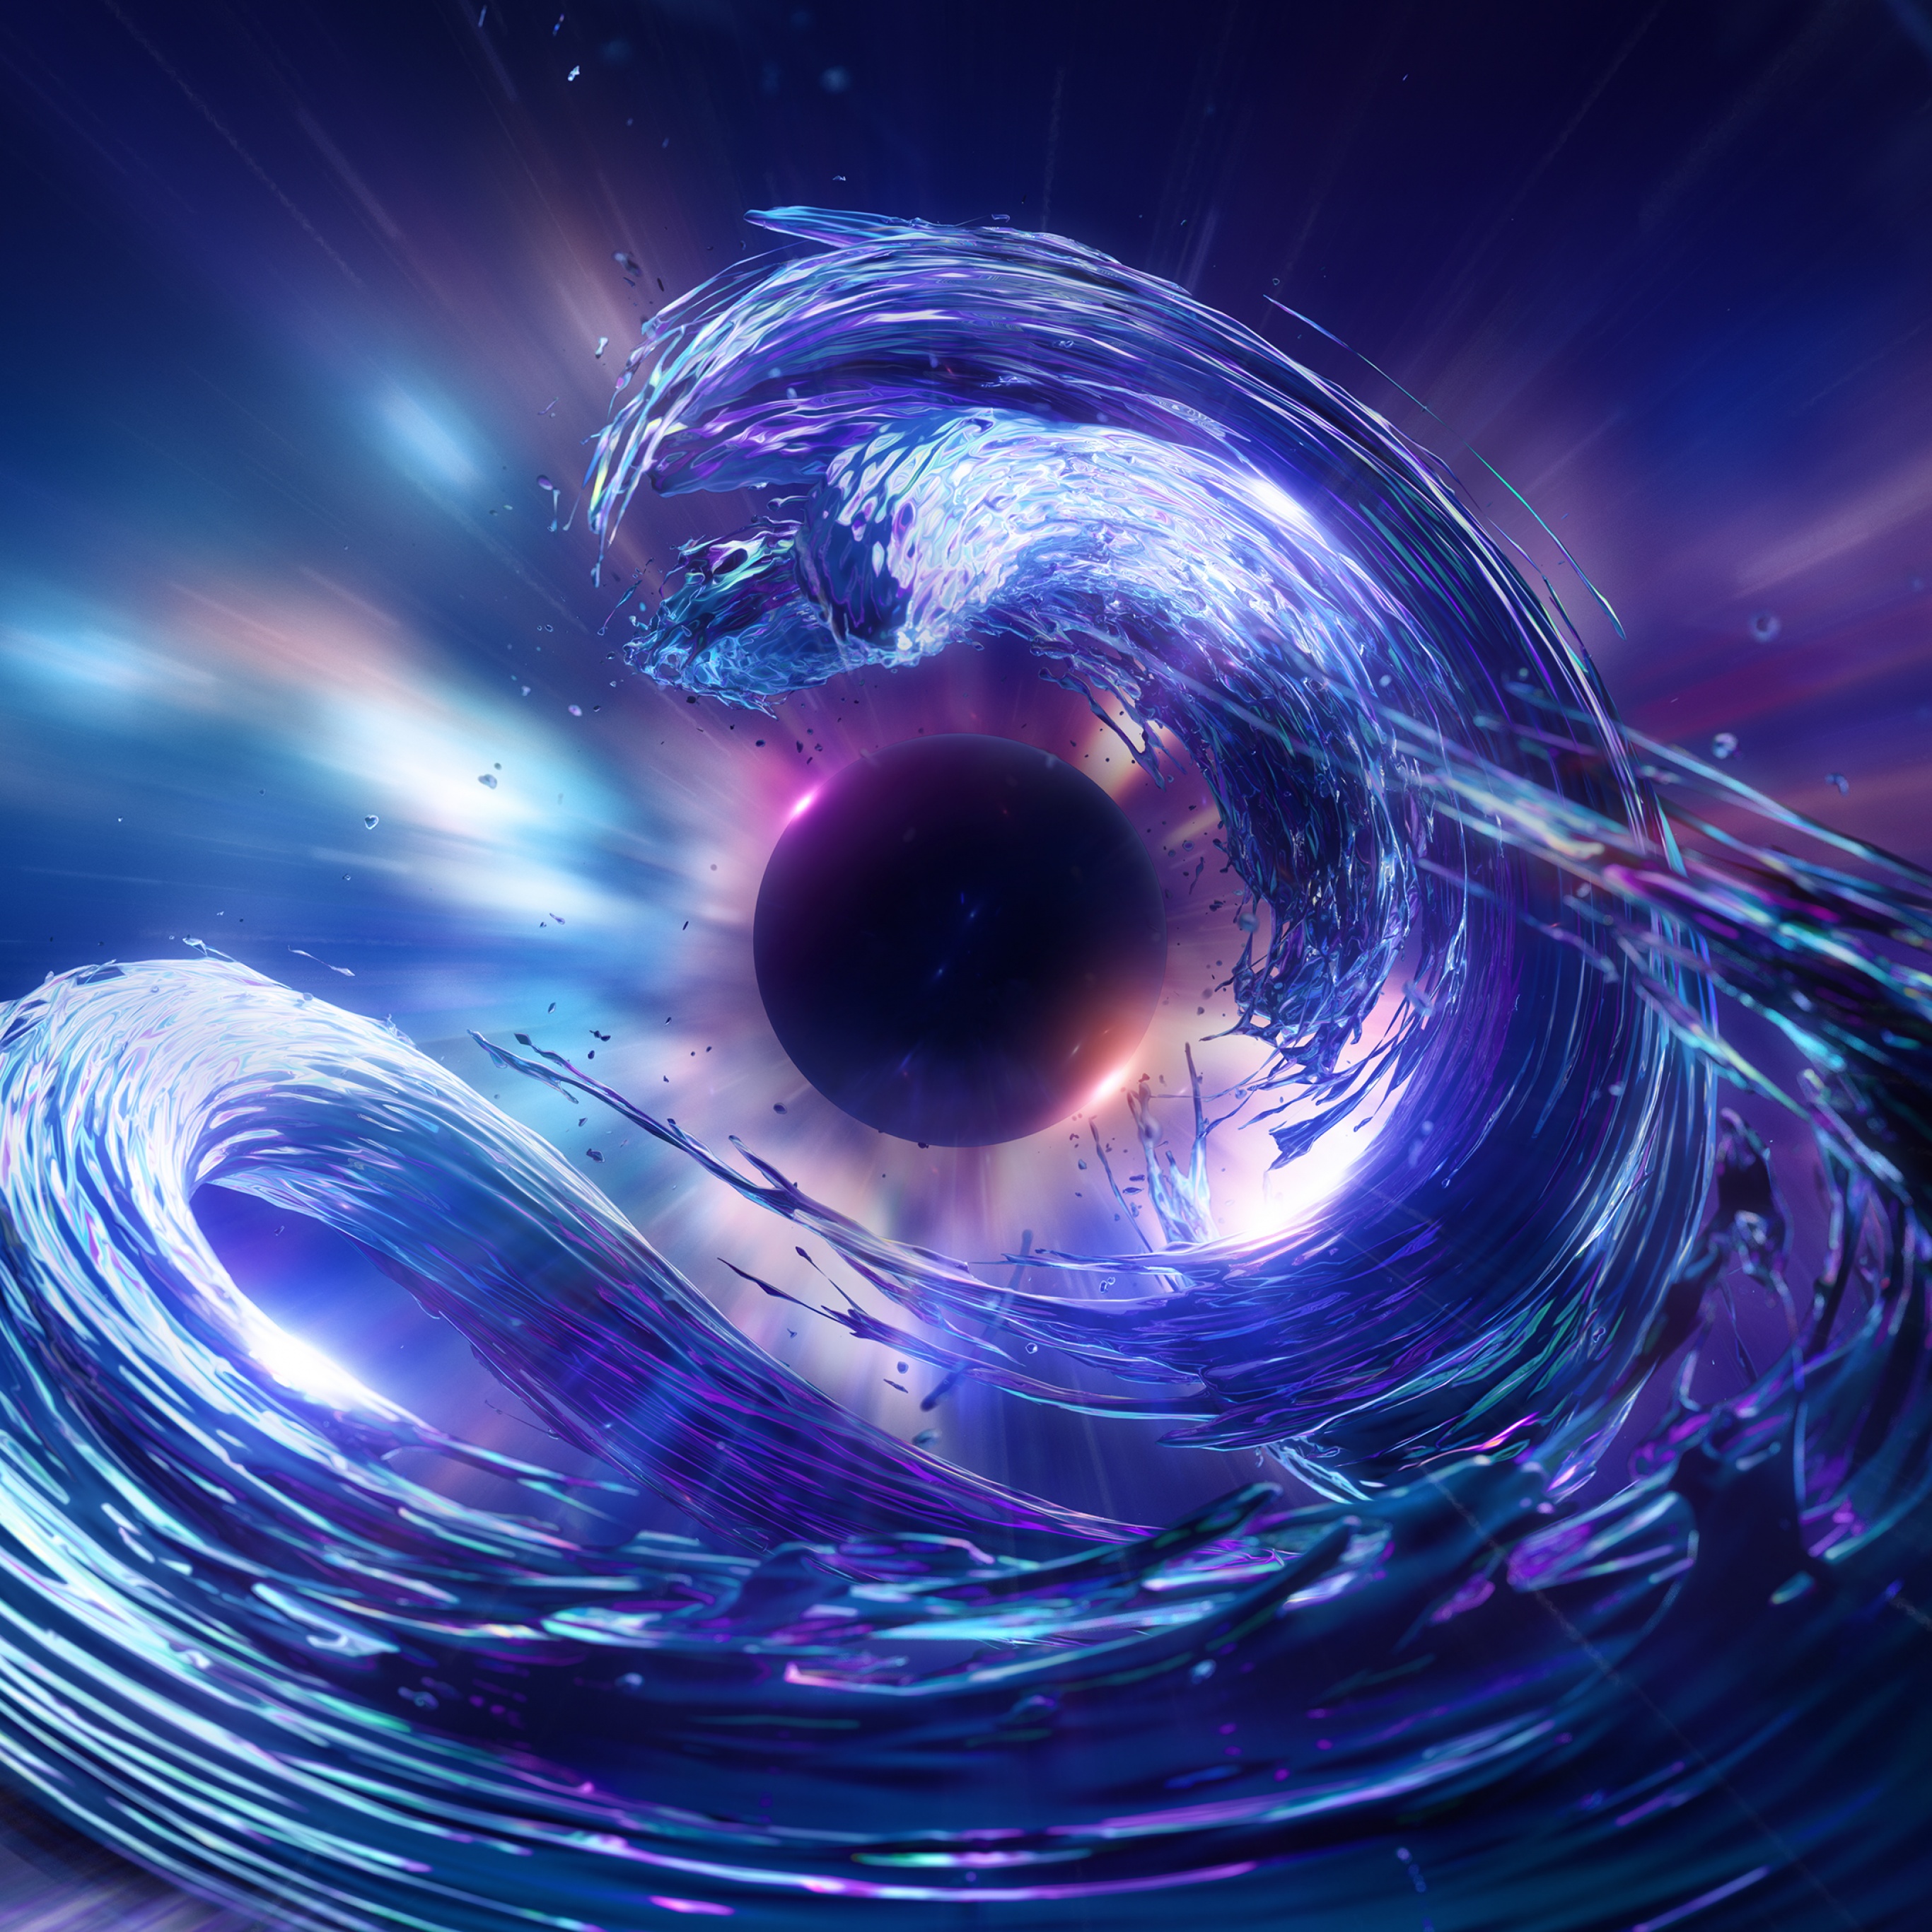 An abstract image of a black hole with a purple spiral around it - Sun